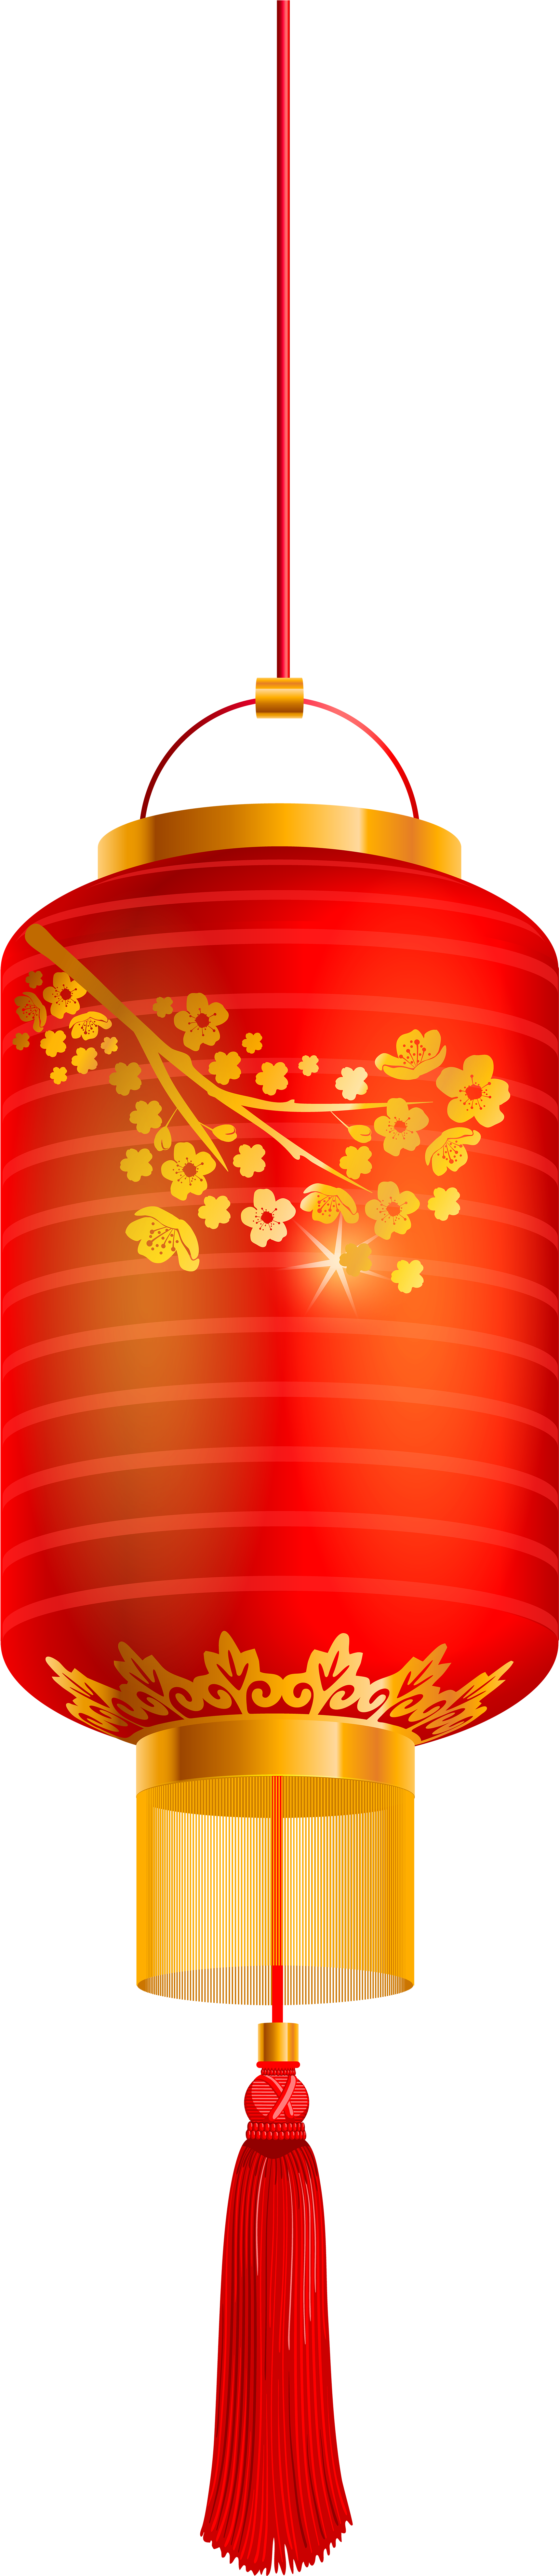 china, food, painting png images online